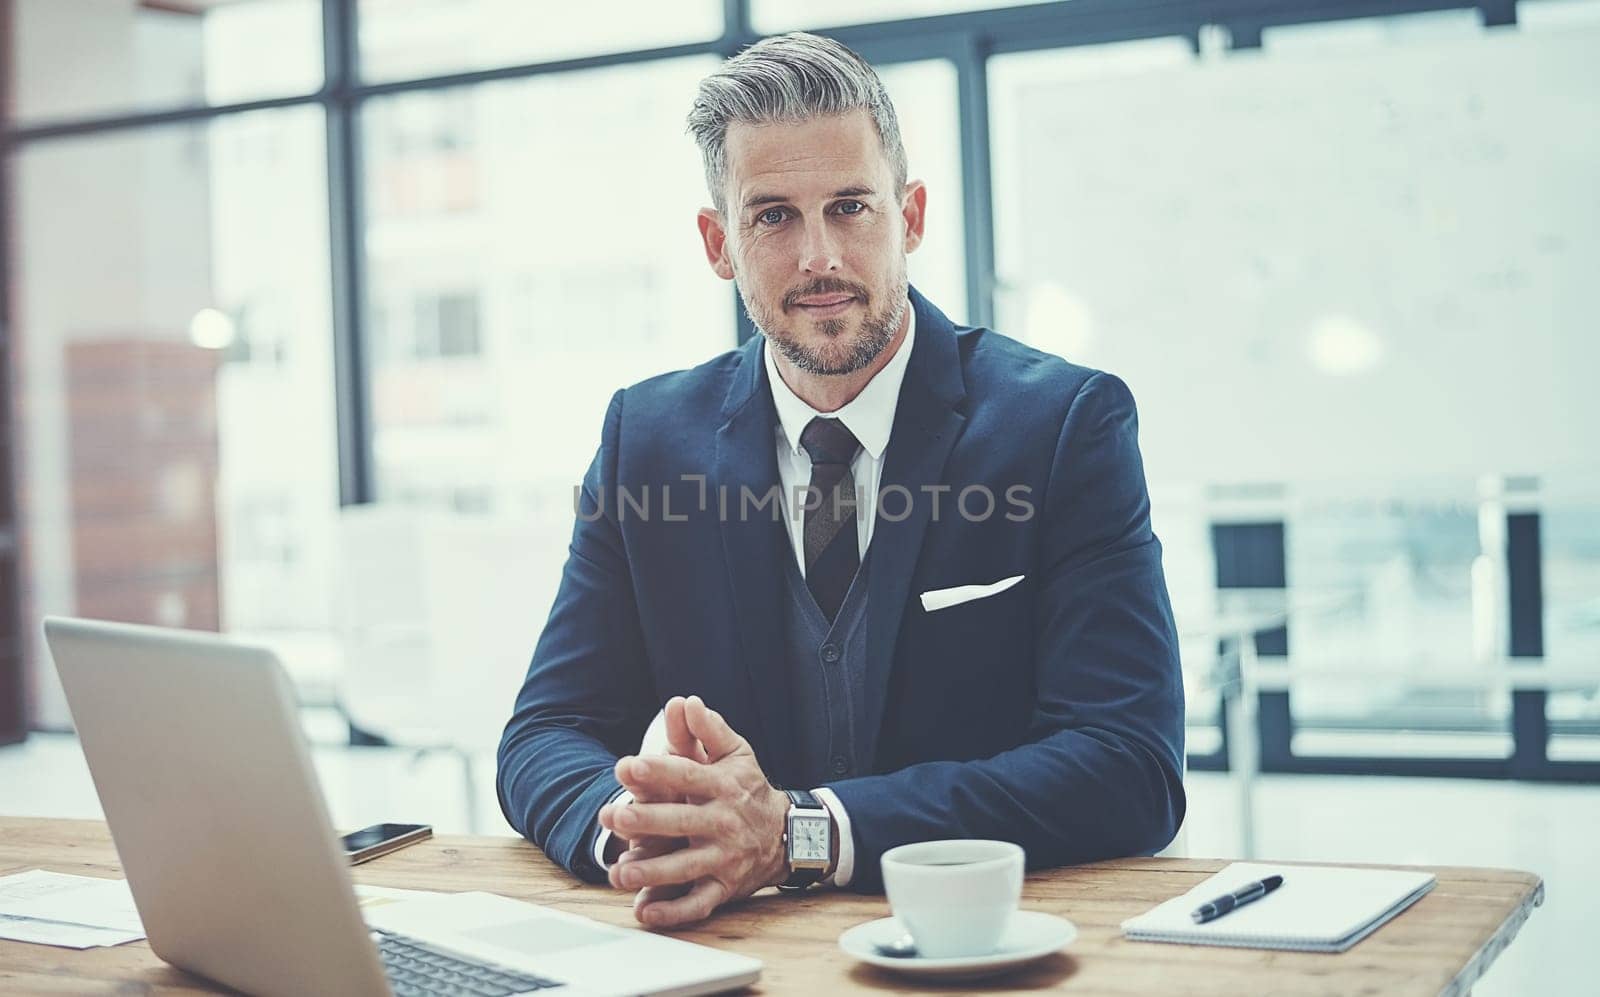 Lets make millions. Portrait of a mature businessman working at his desk in a modern office